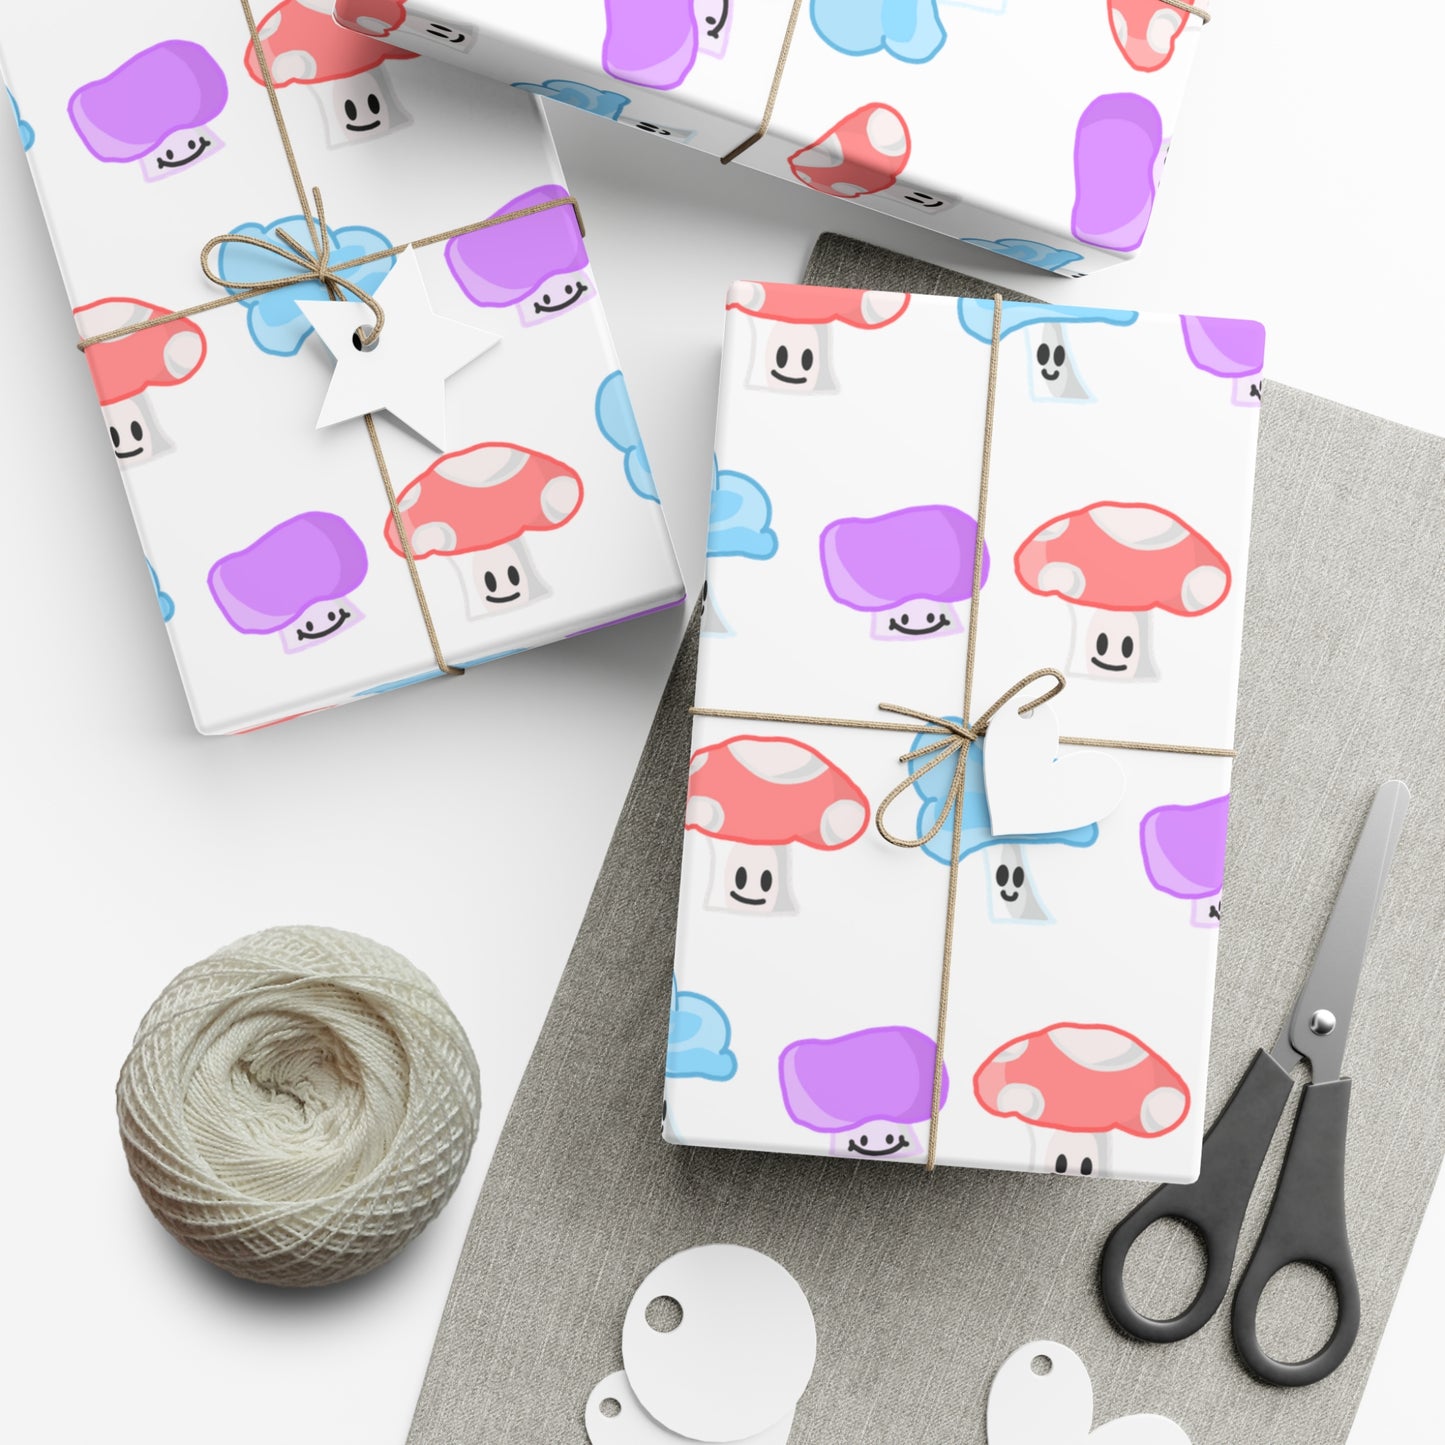 Mushroom Faces Wrapping Paper, Holiday Wrap, Watercolor Mushrooms, Gift Wrap Papers, 2 finishes